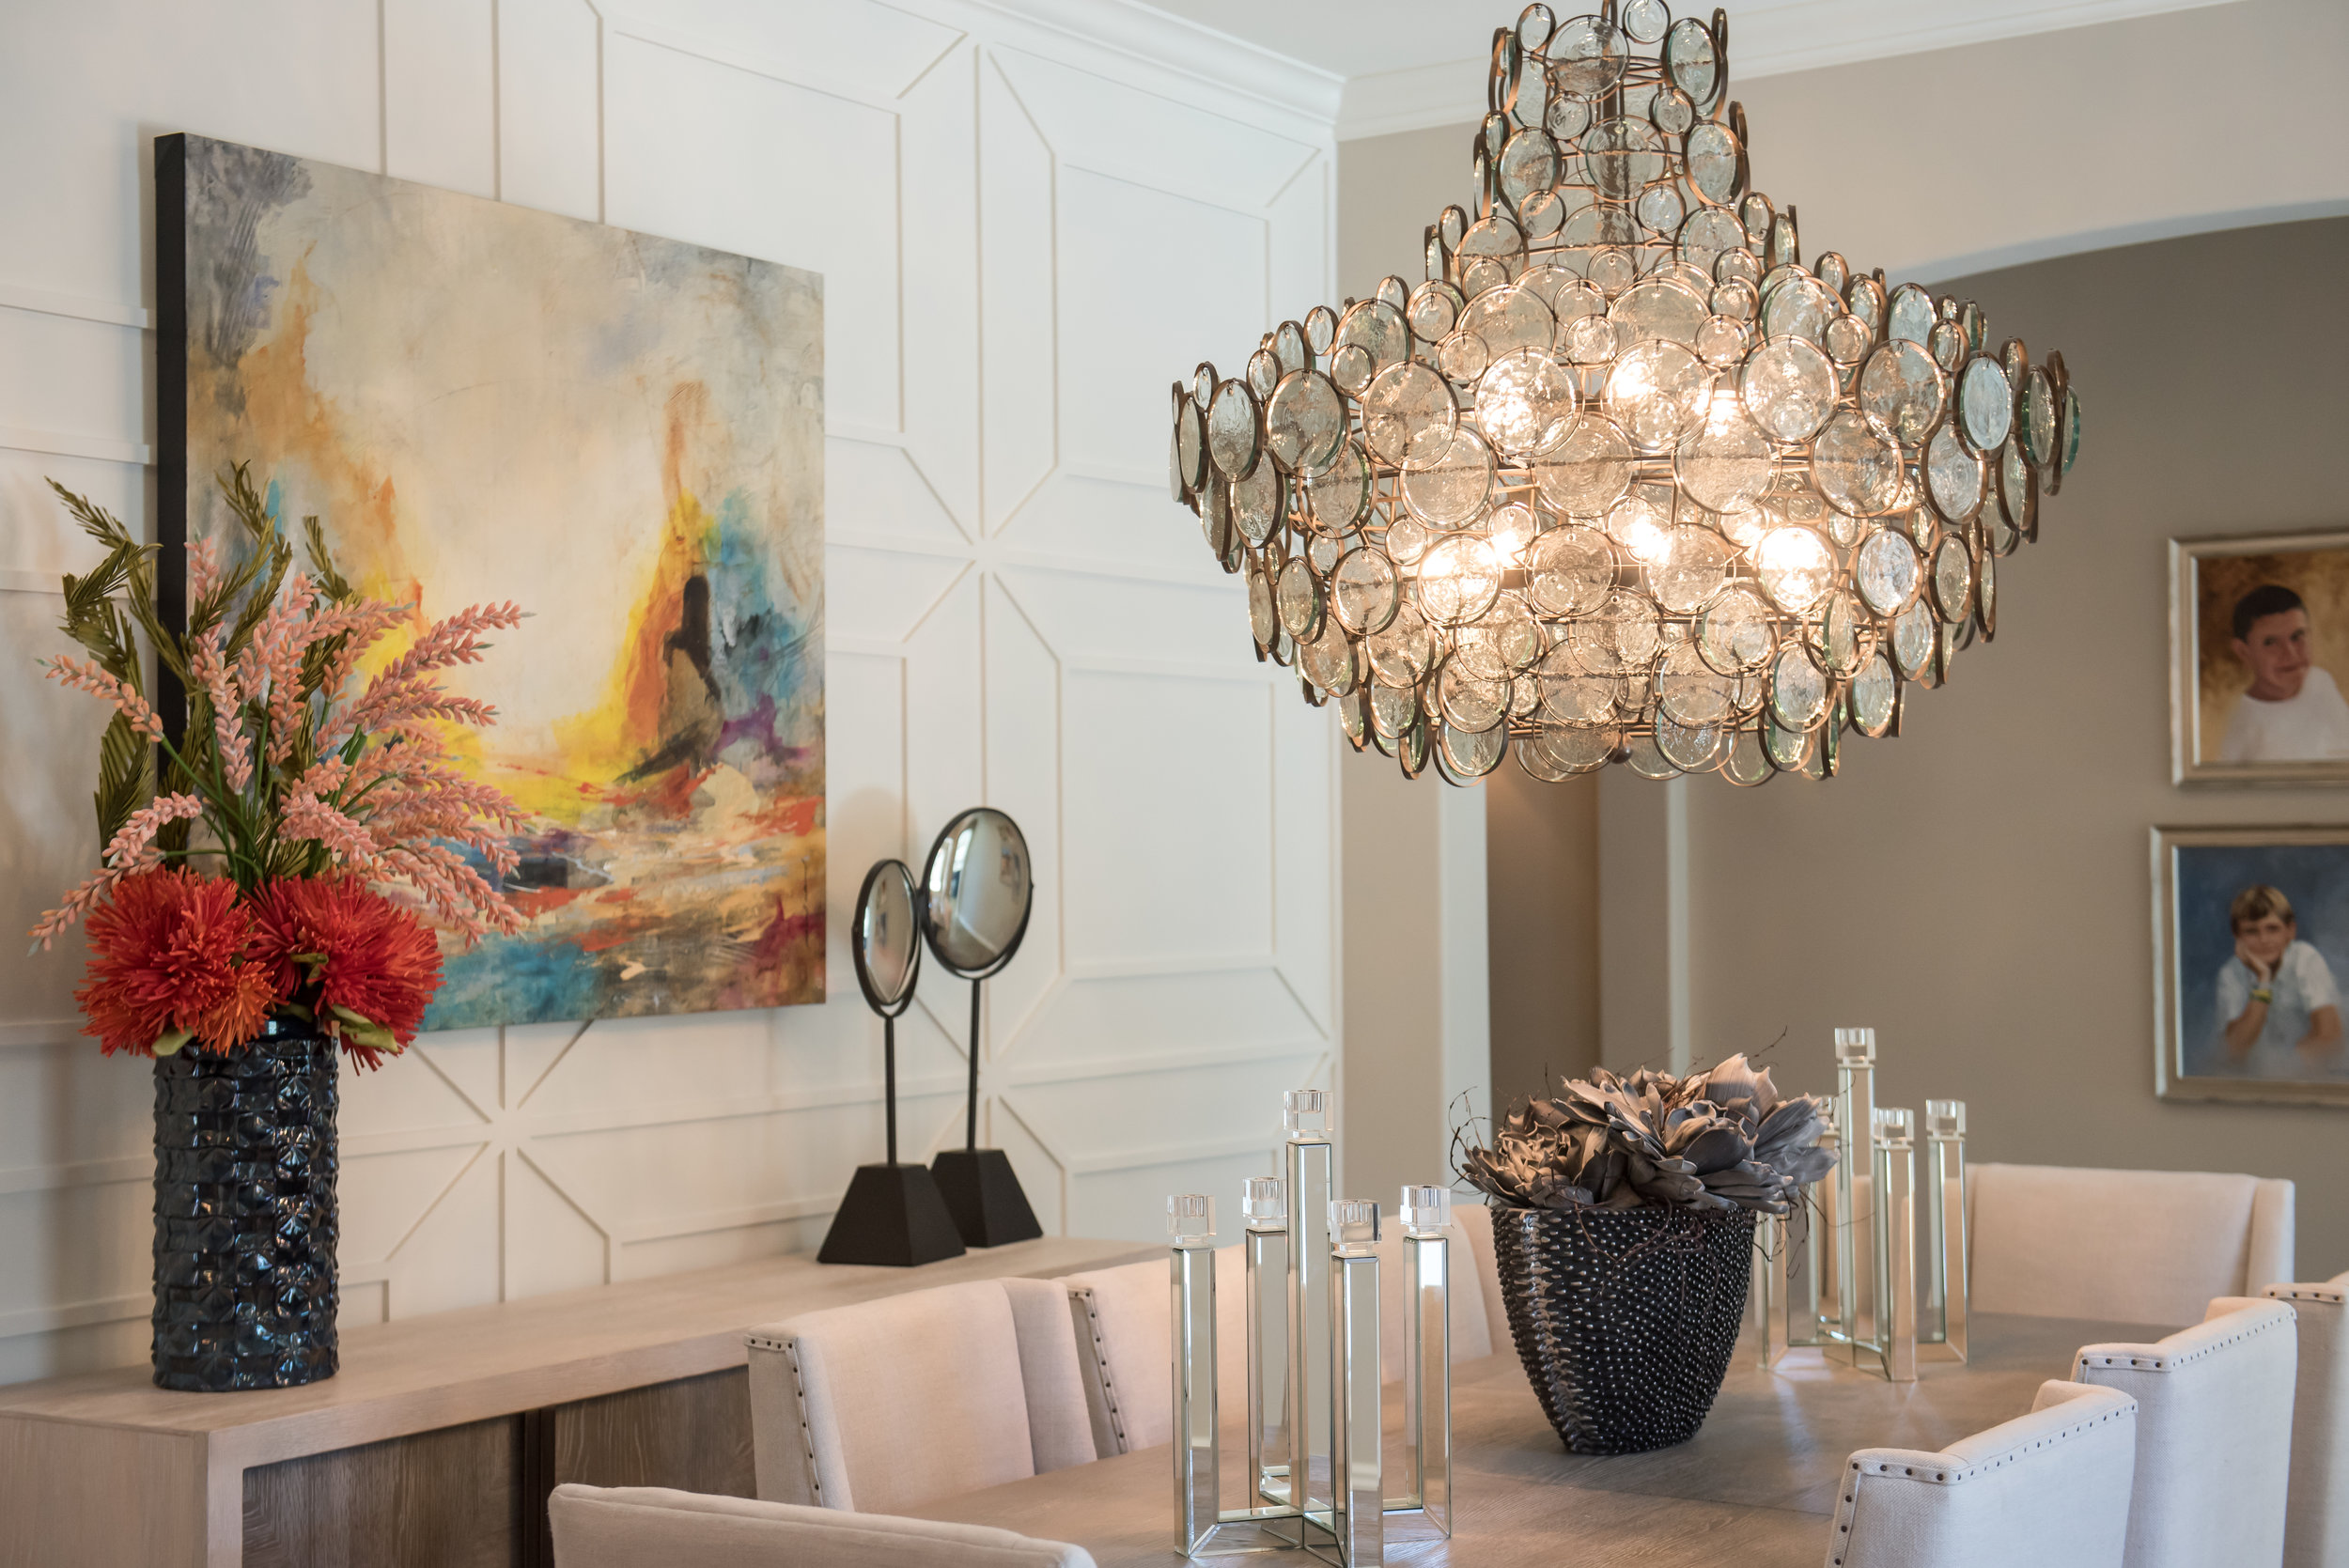 4Dining+Chandelier+Woodtable+Transitional+Colorful+Art.jpg